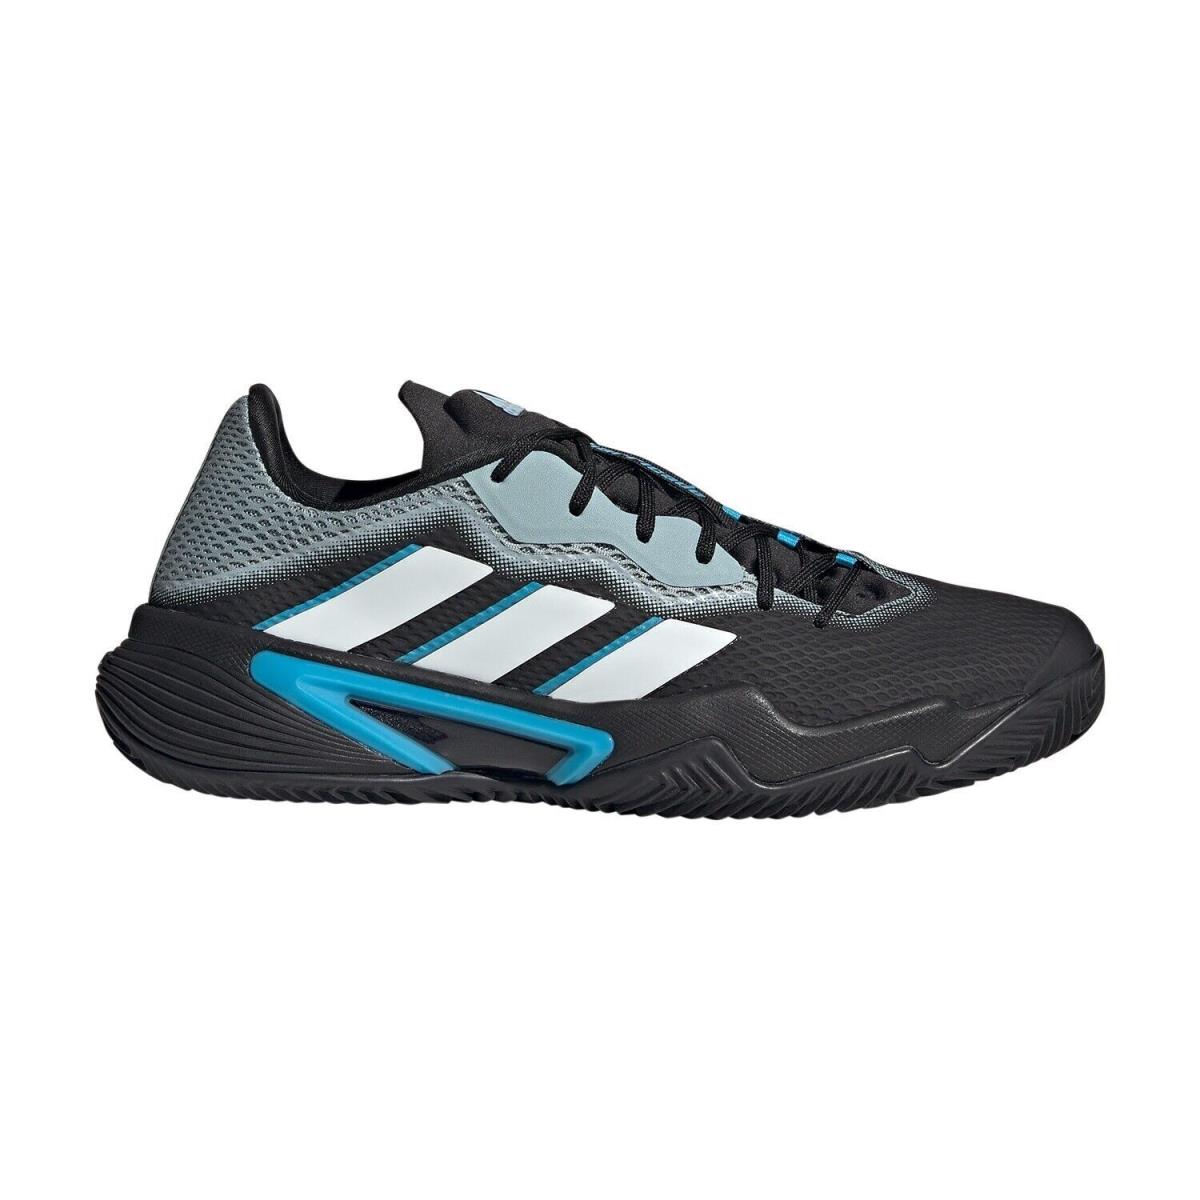 Men Adidas Barricade Clay Tennis Shoes Sneakers Black Grey Blue White H02047